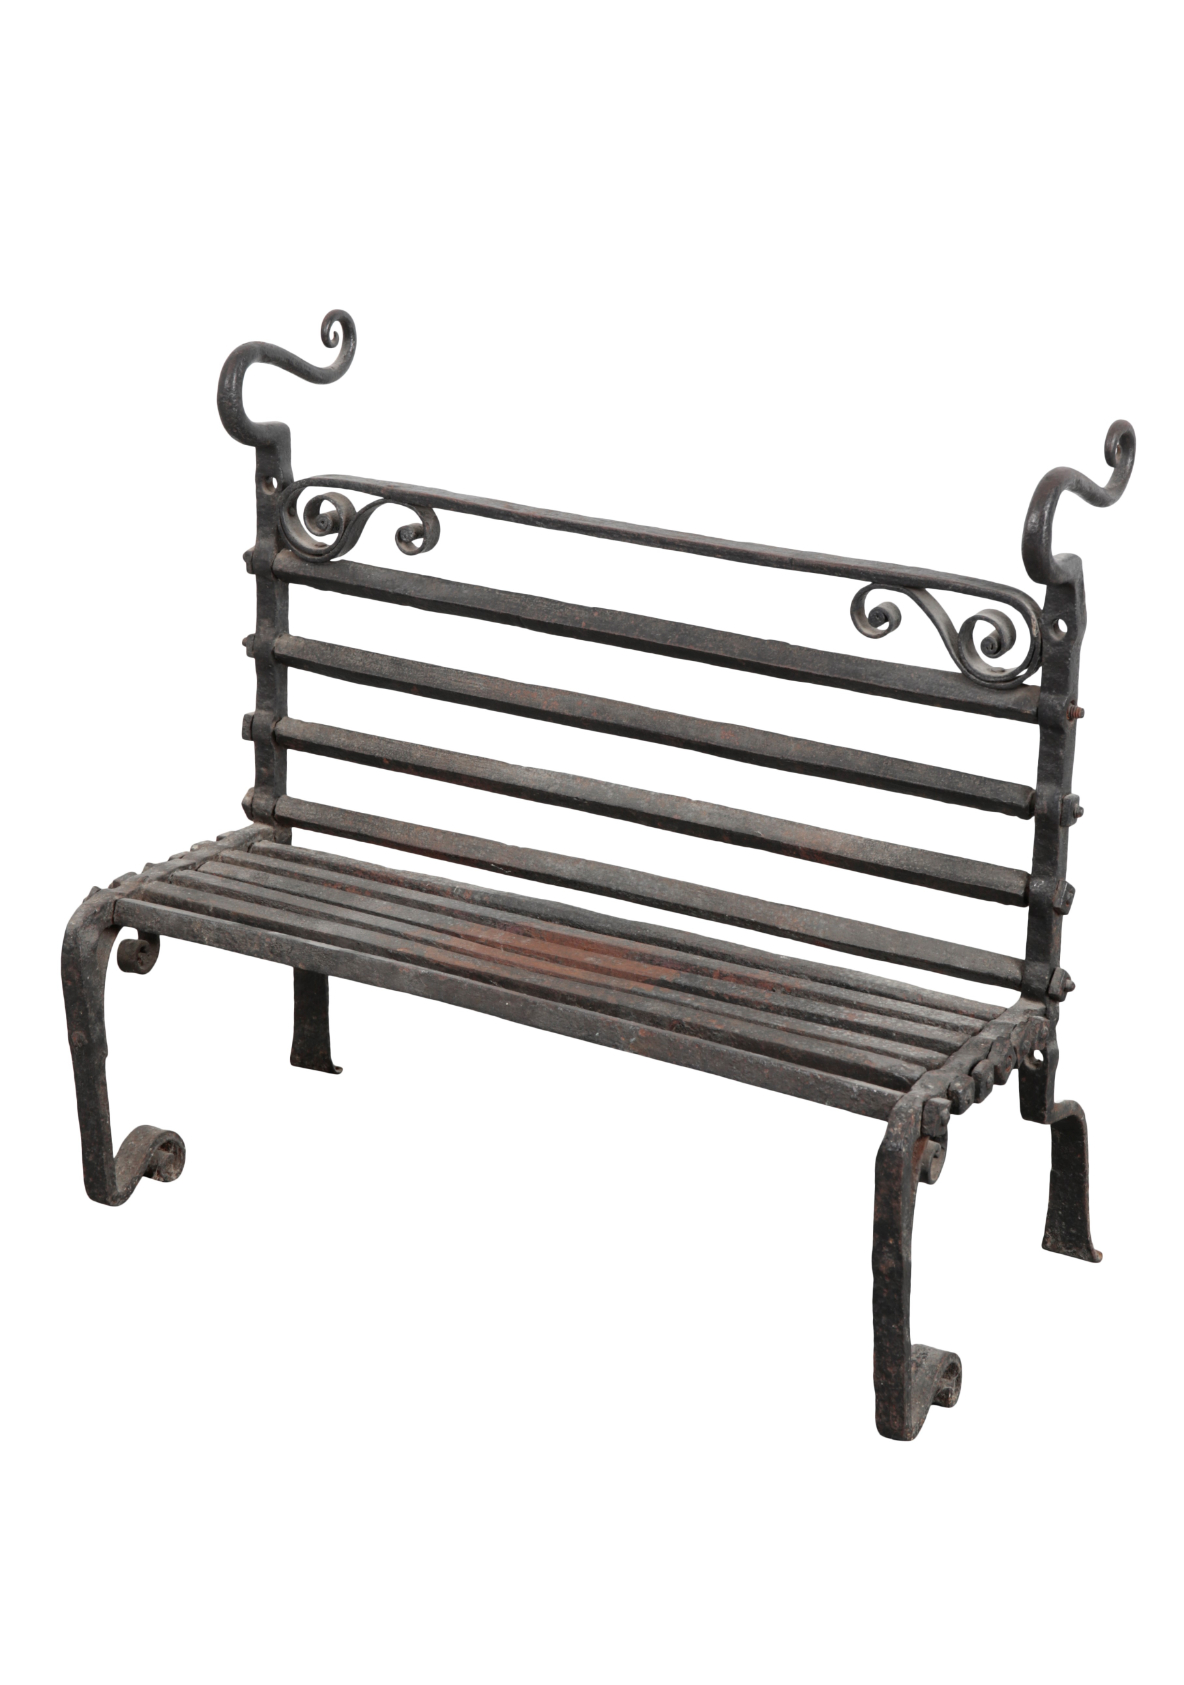 A WROUGHT IRON GRATE probably 19th Century,